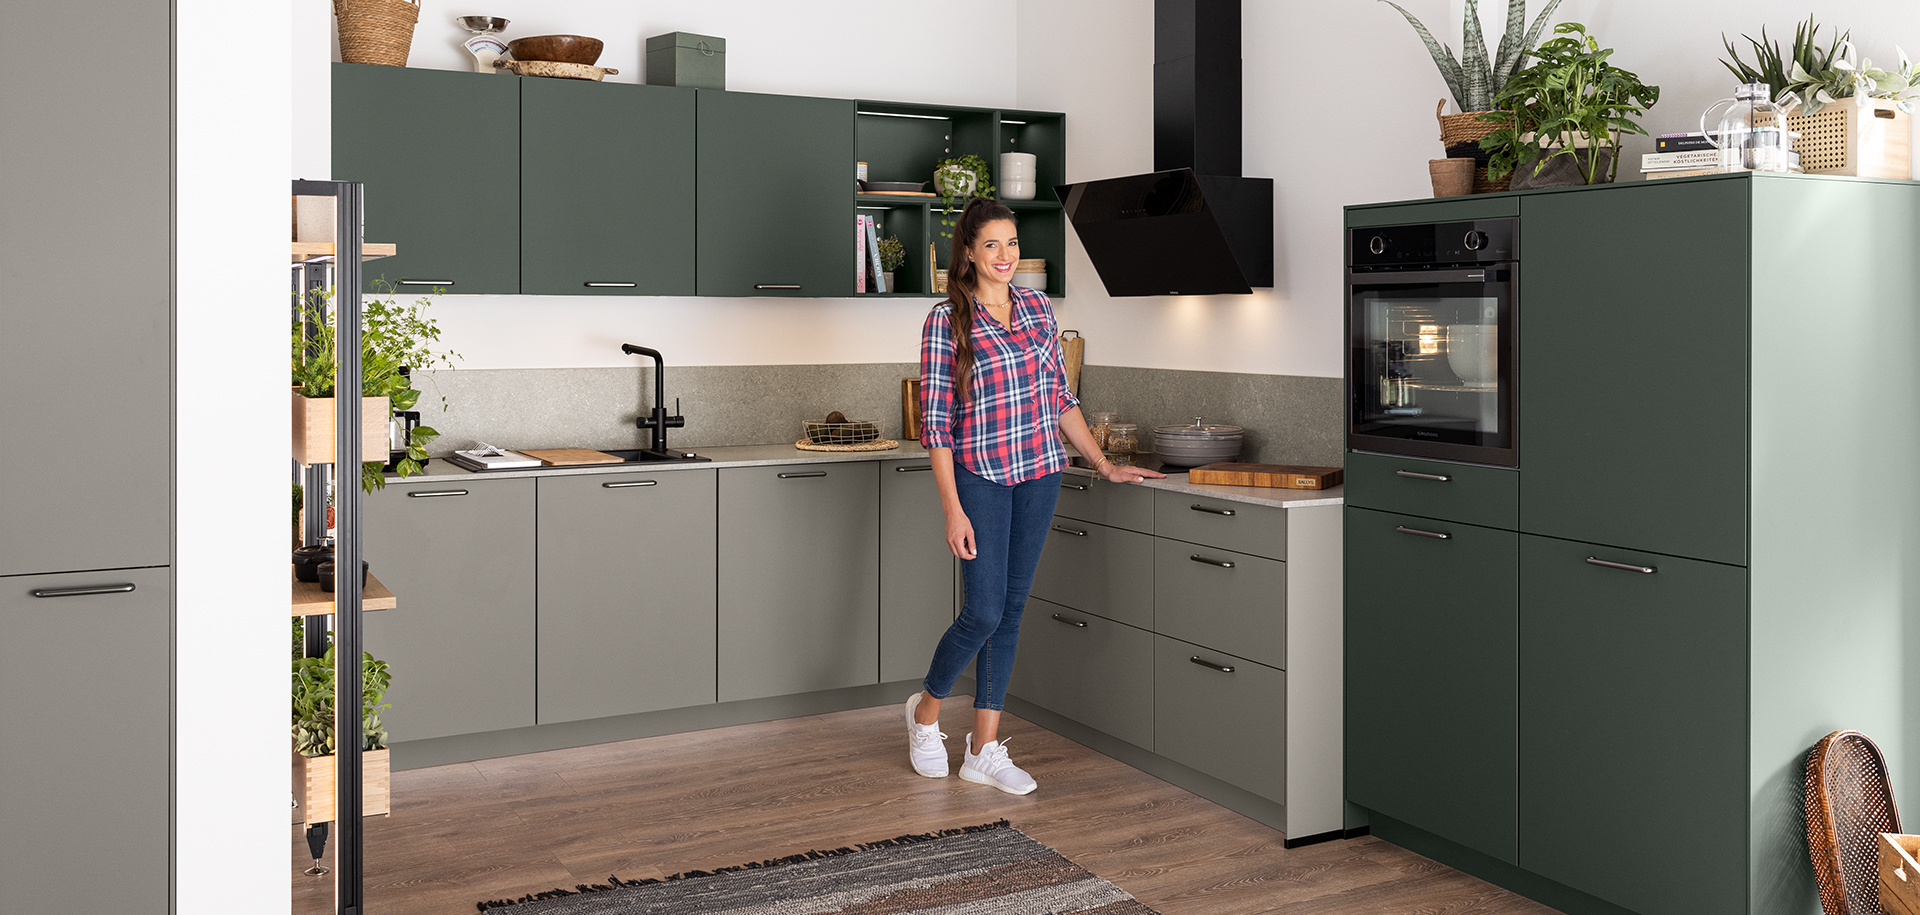 Woman standing in a modern kitchen with green cabinets, stainless steel appliances, and wood accents, giving a welcoming gesture.